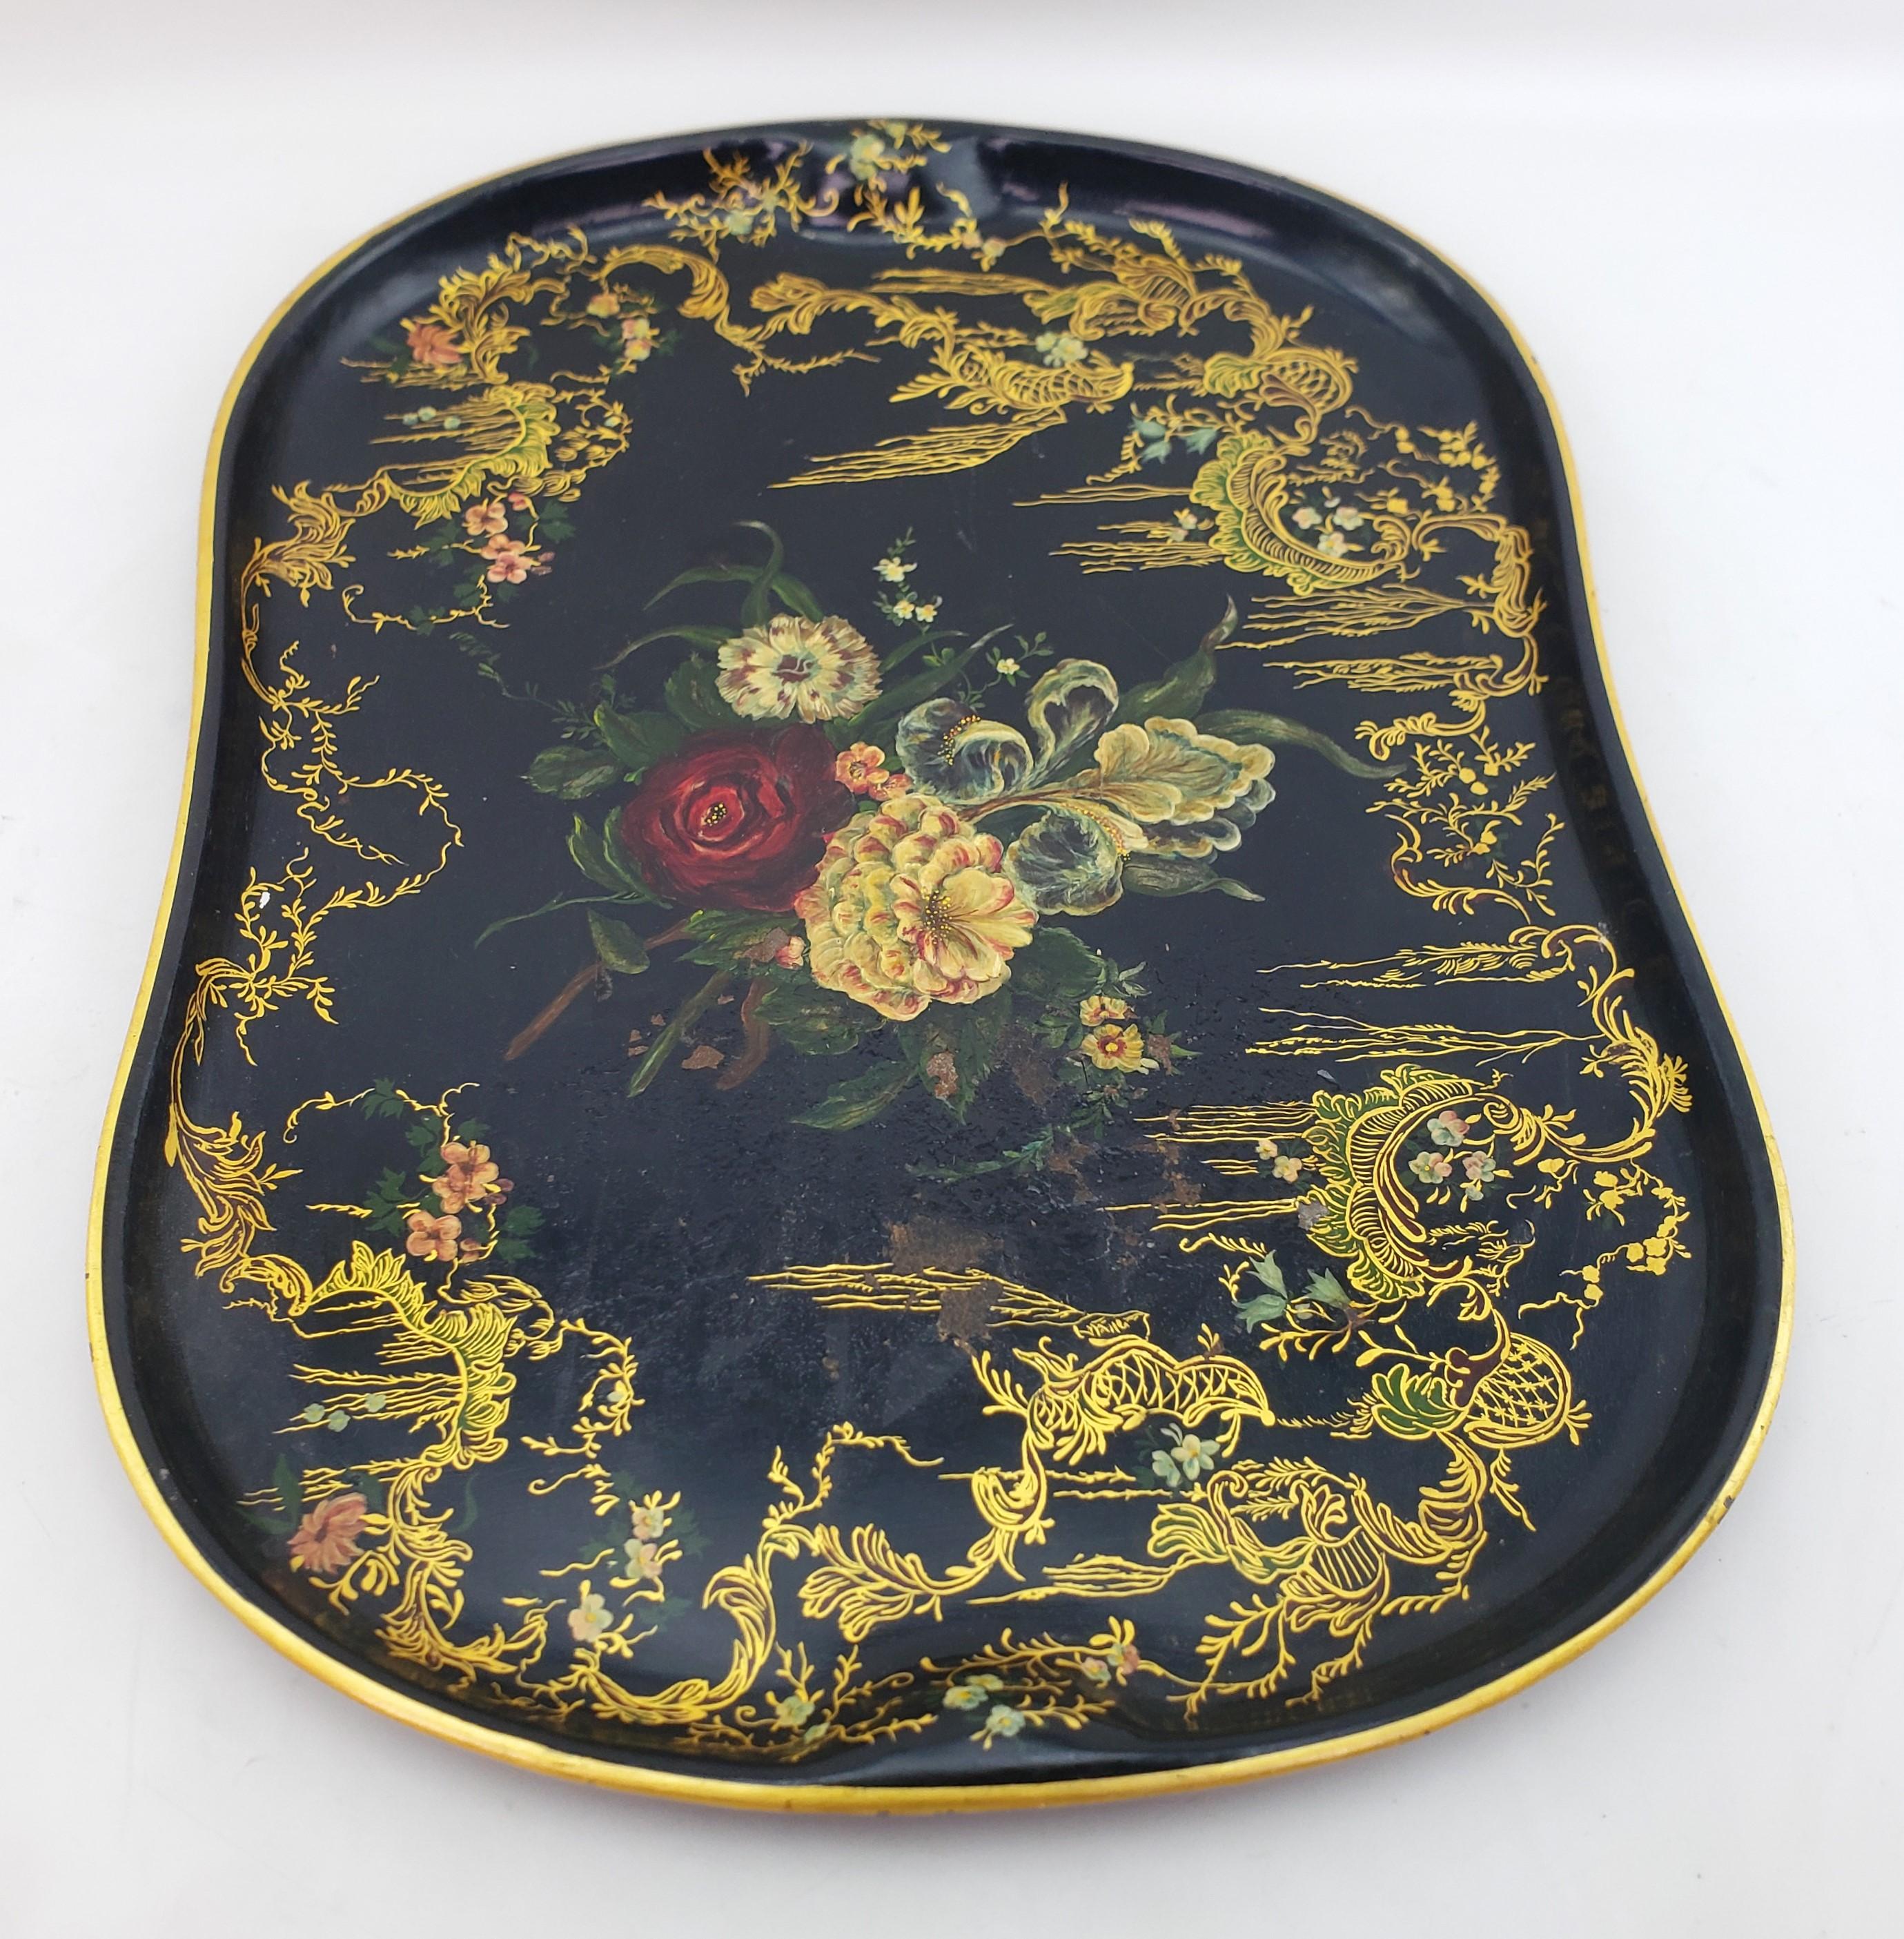 Large Antique Toleware Serving Tray with Floral Decoration & Gilt Accents In Good Condition For Sale In Hamilton, Ontario